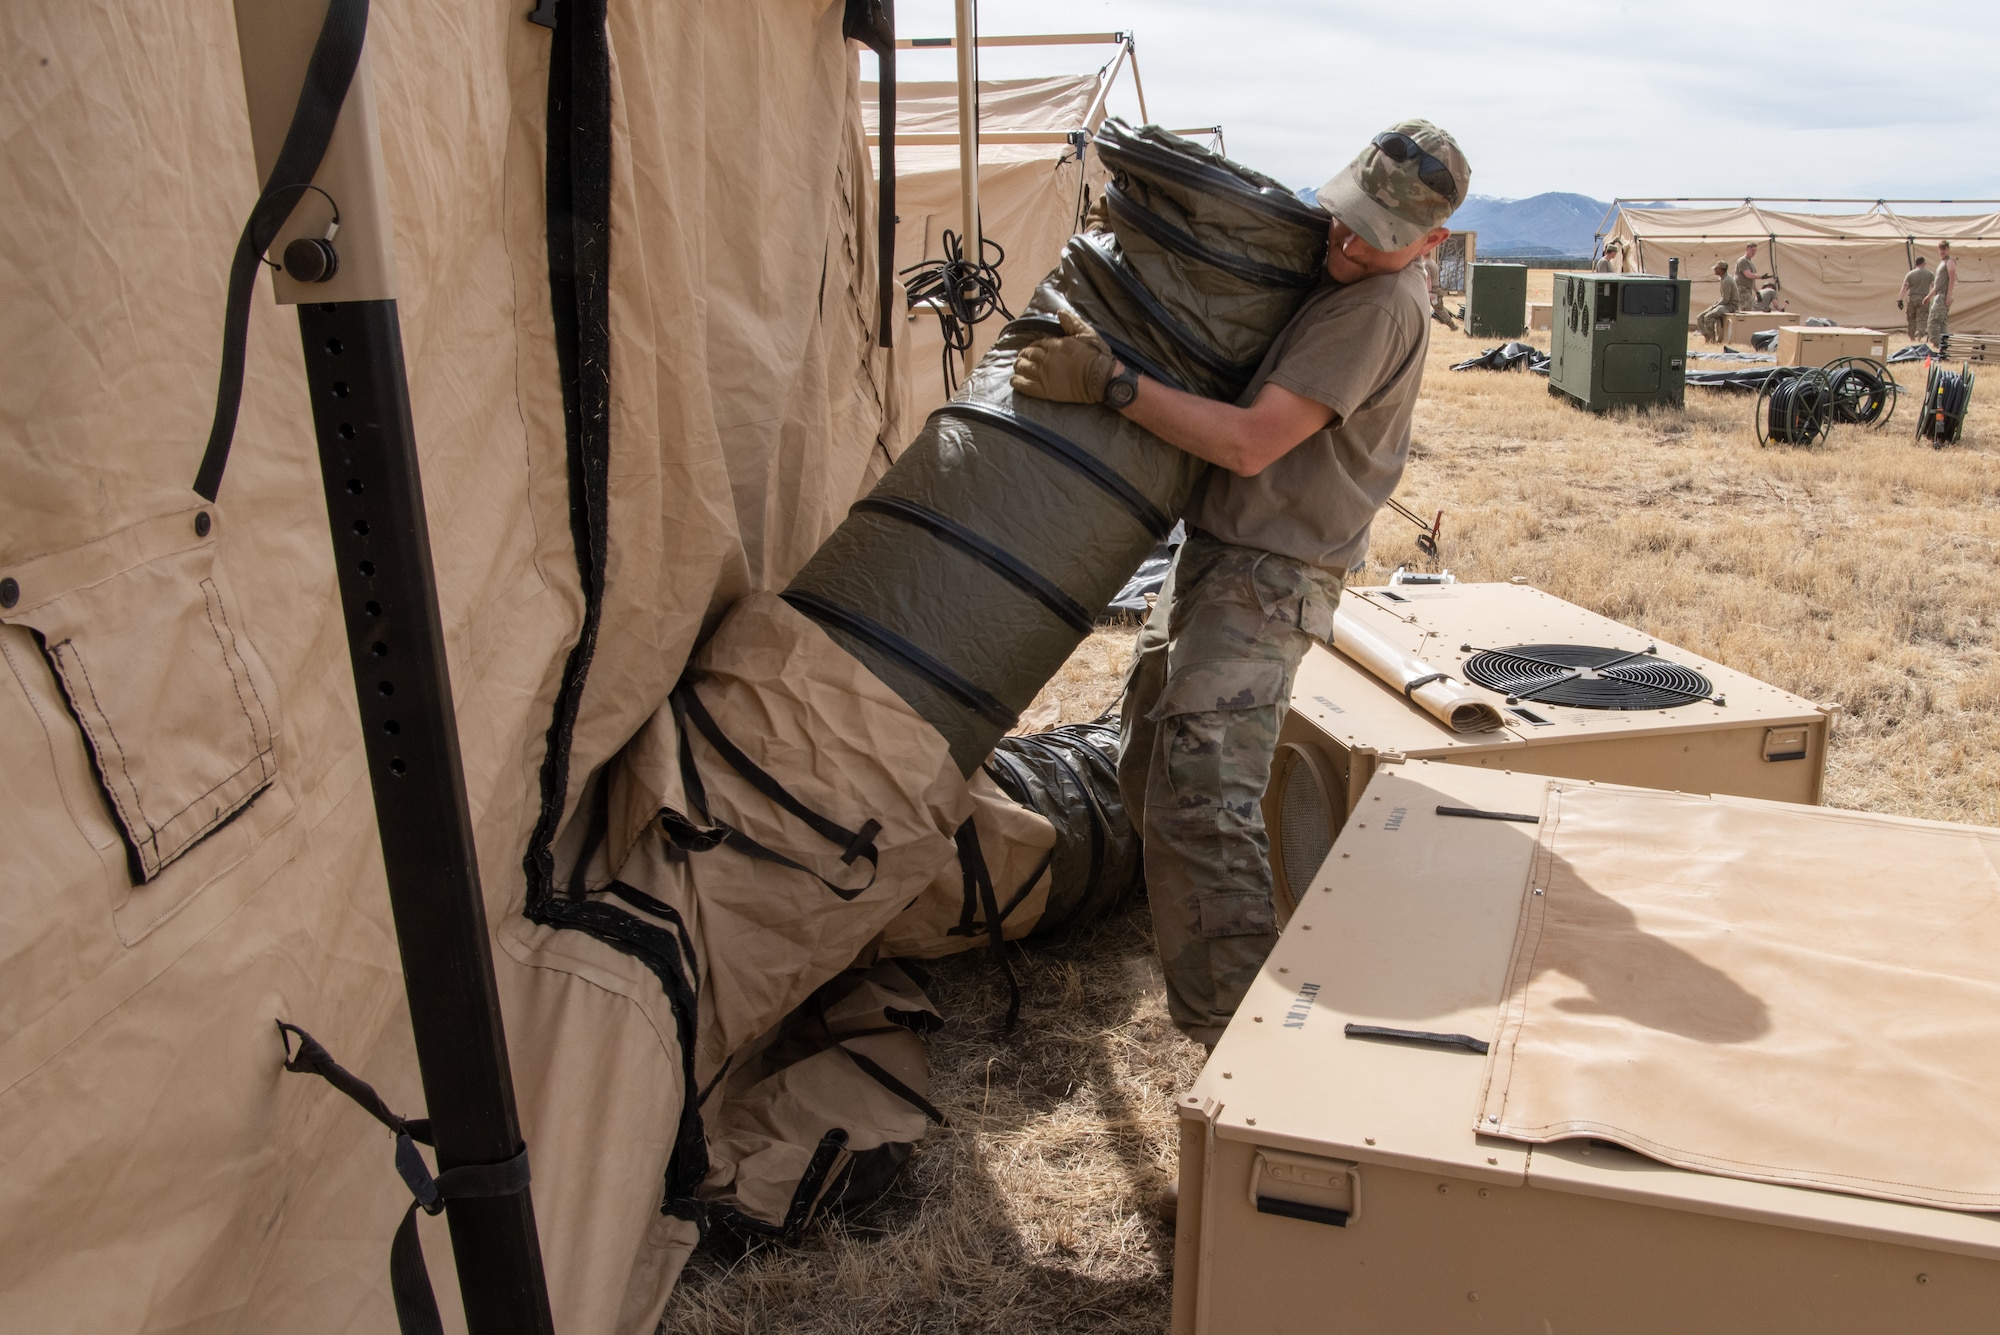 U.S. Air Force Senior Airman Robert Ditsch, 27th Special Operations Civil Engineer Squadron heating, ventilation and air conditioning journeyman, connects an air duct from a Utilis TM-80 tent to an air conditioning unit during the Full Mission Profile 22-3 exercise at Sierra Blanca Regional Airport, New Mexico. (U.S. Air Force photo by Airman 1st Class Alexis Sandoval)